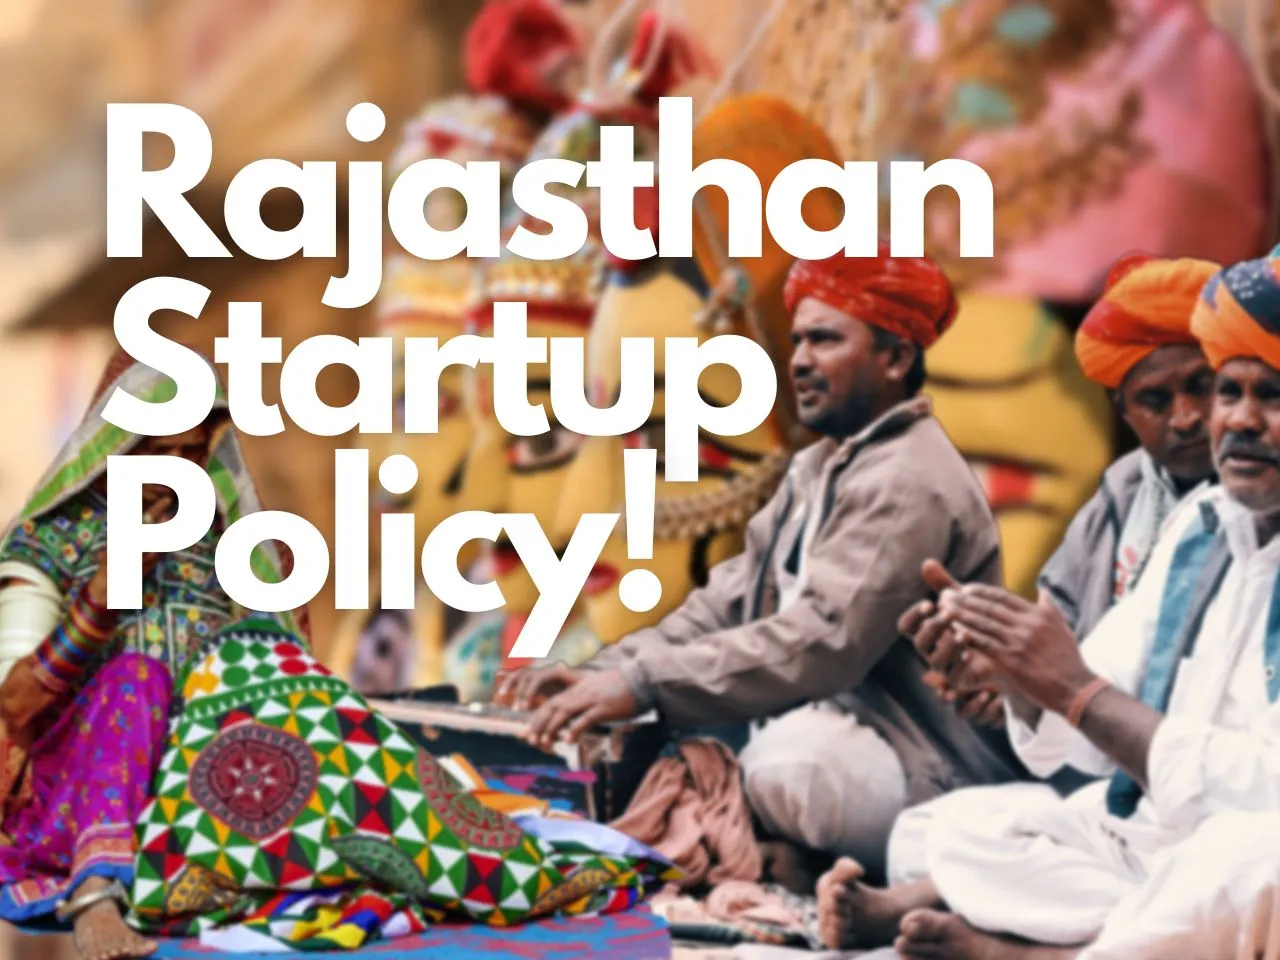 How To Become A Startup In Rajasthan? Know Rajasthan Startup Policy!